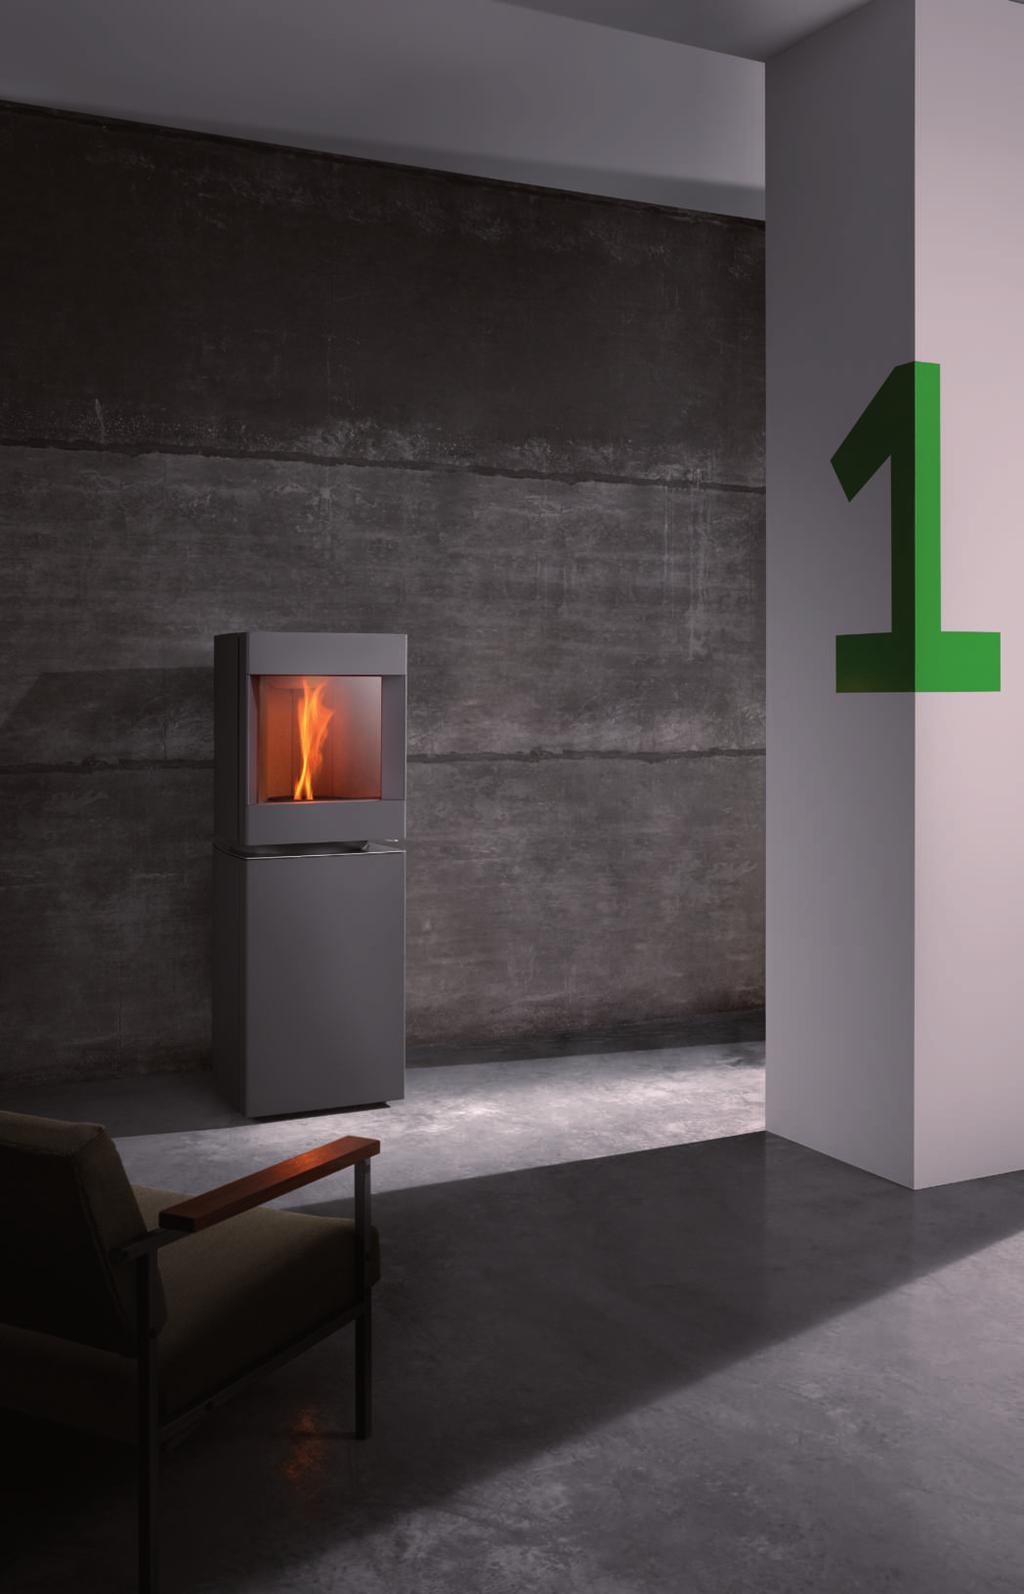 Spotlight on heat + Pellet stove giving a broad, full flame + Pivoting upper part + Operates silently + Bottom